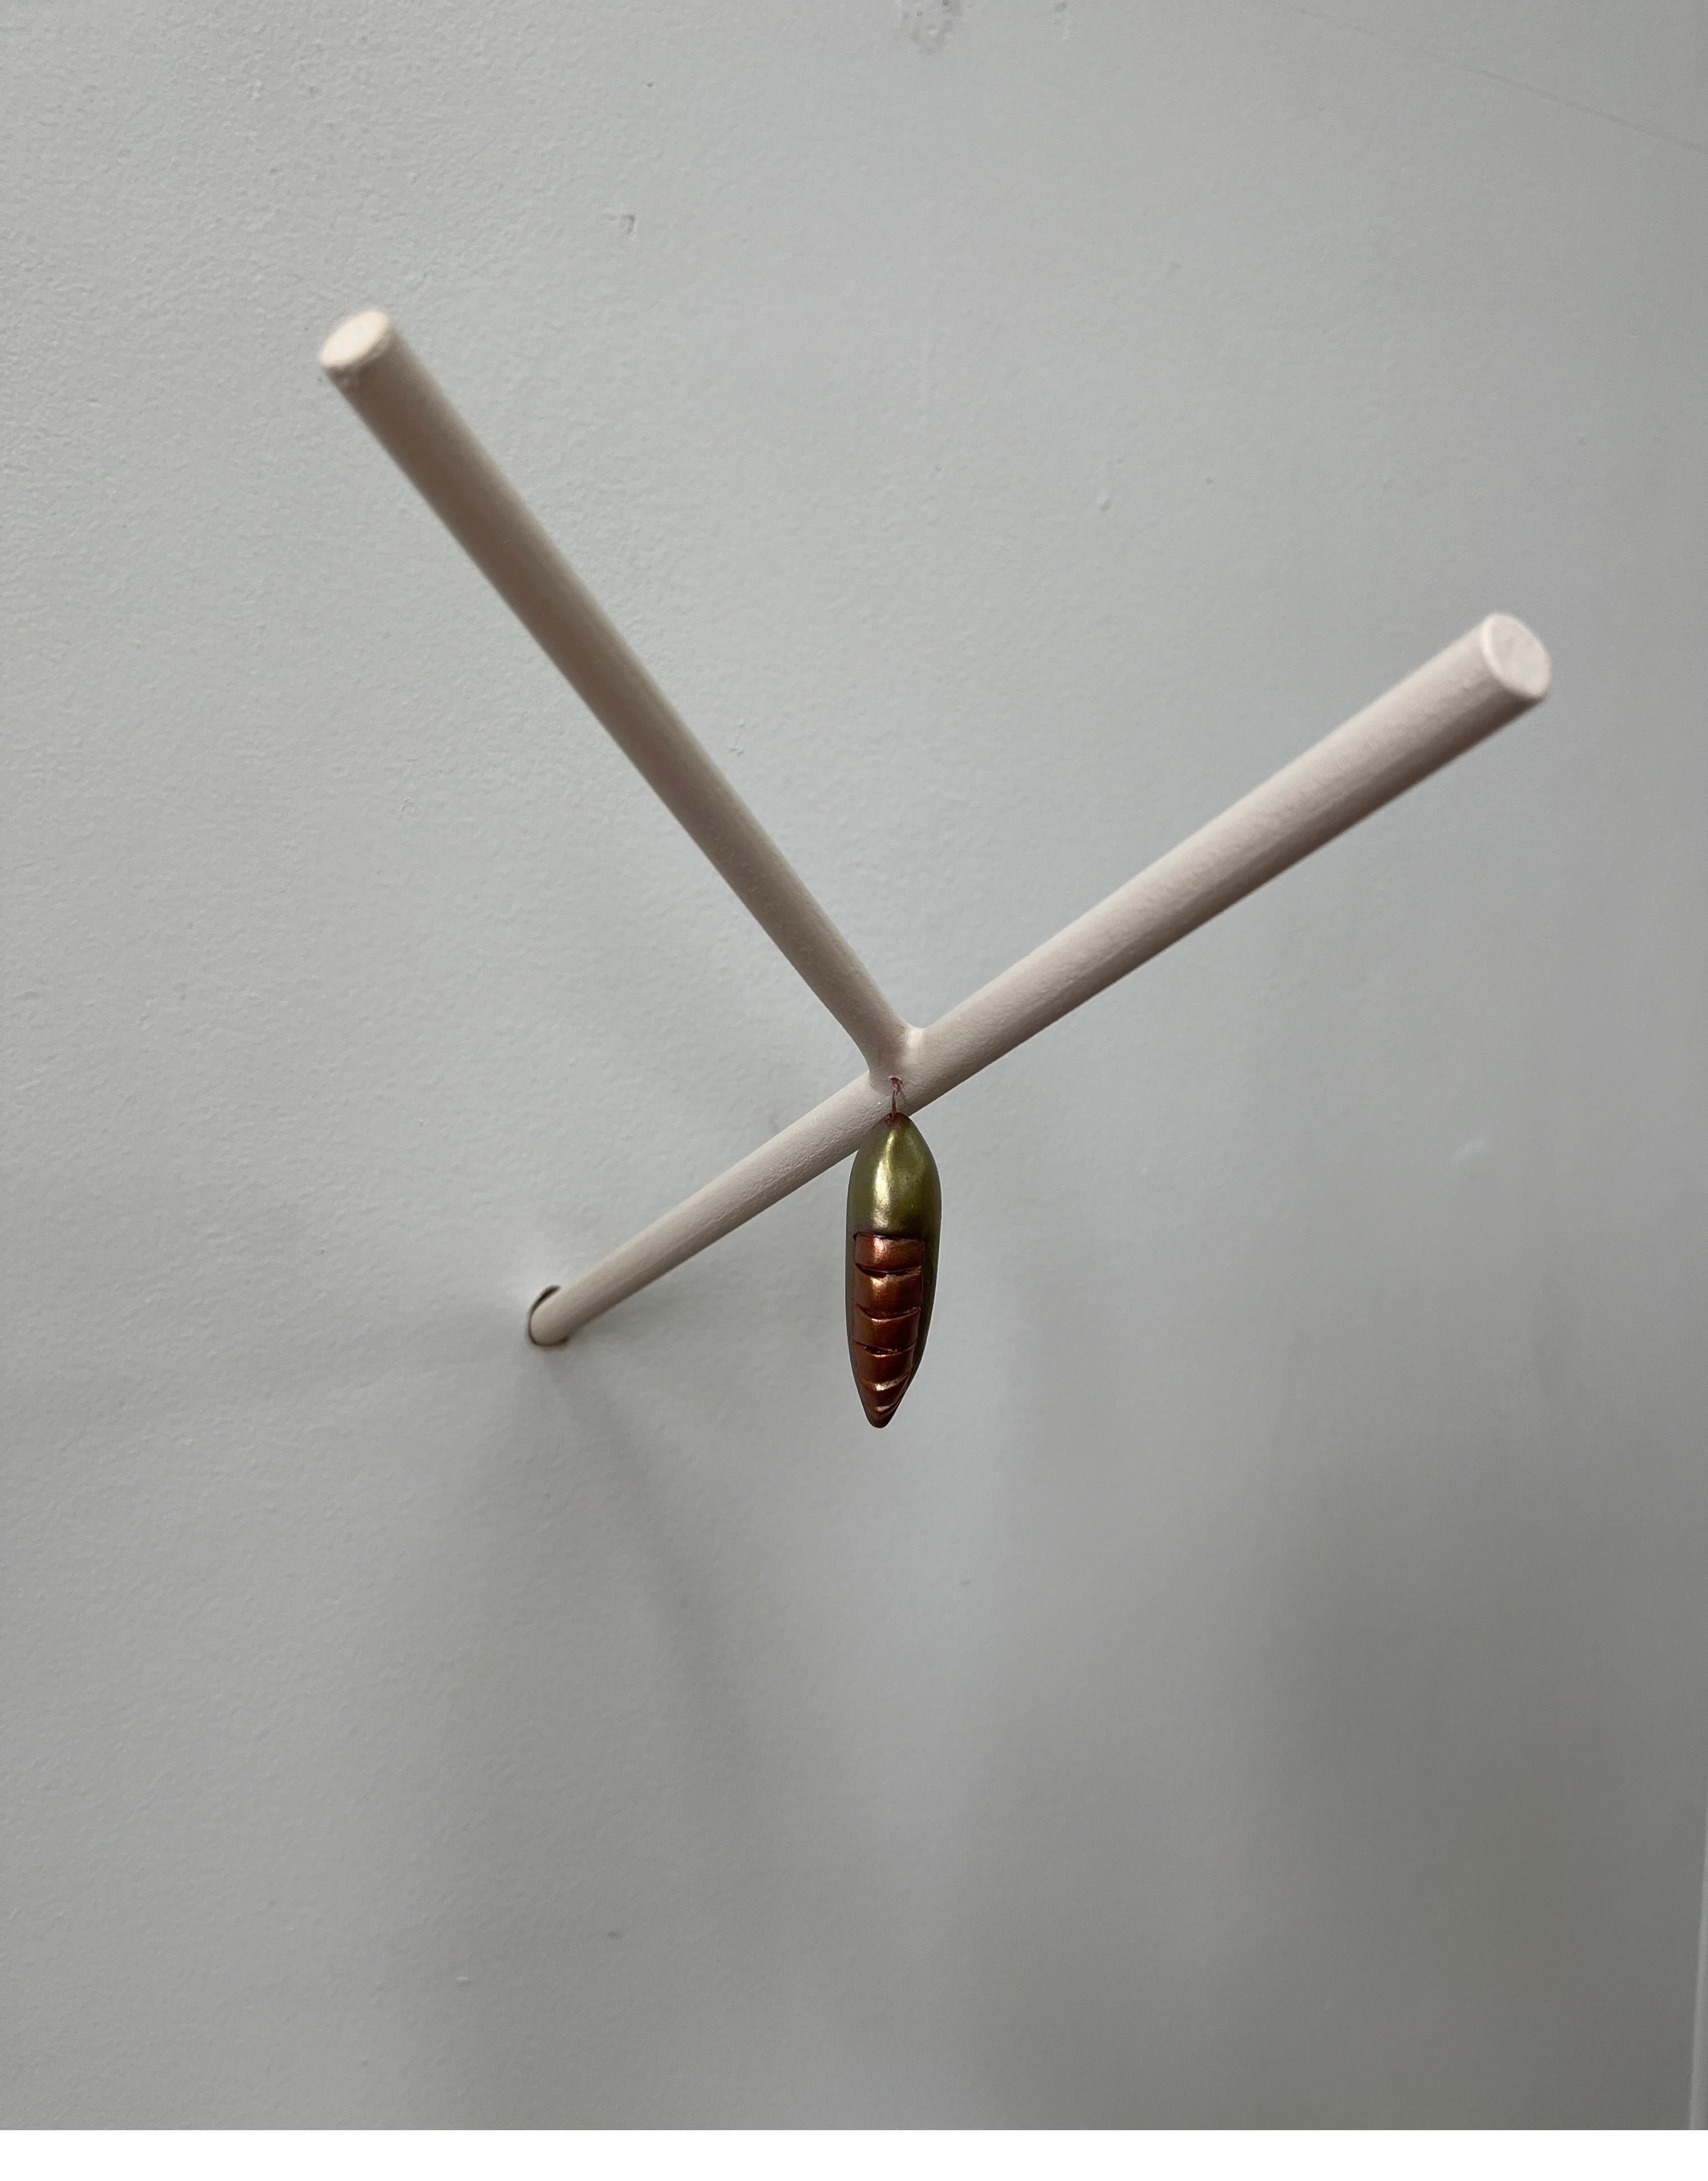 Chrysalis on a minimalist Branch (two) - Gray Figurative Sculpture by Bethany Krull